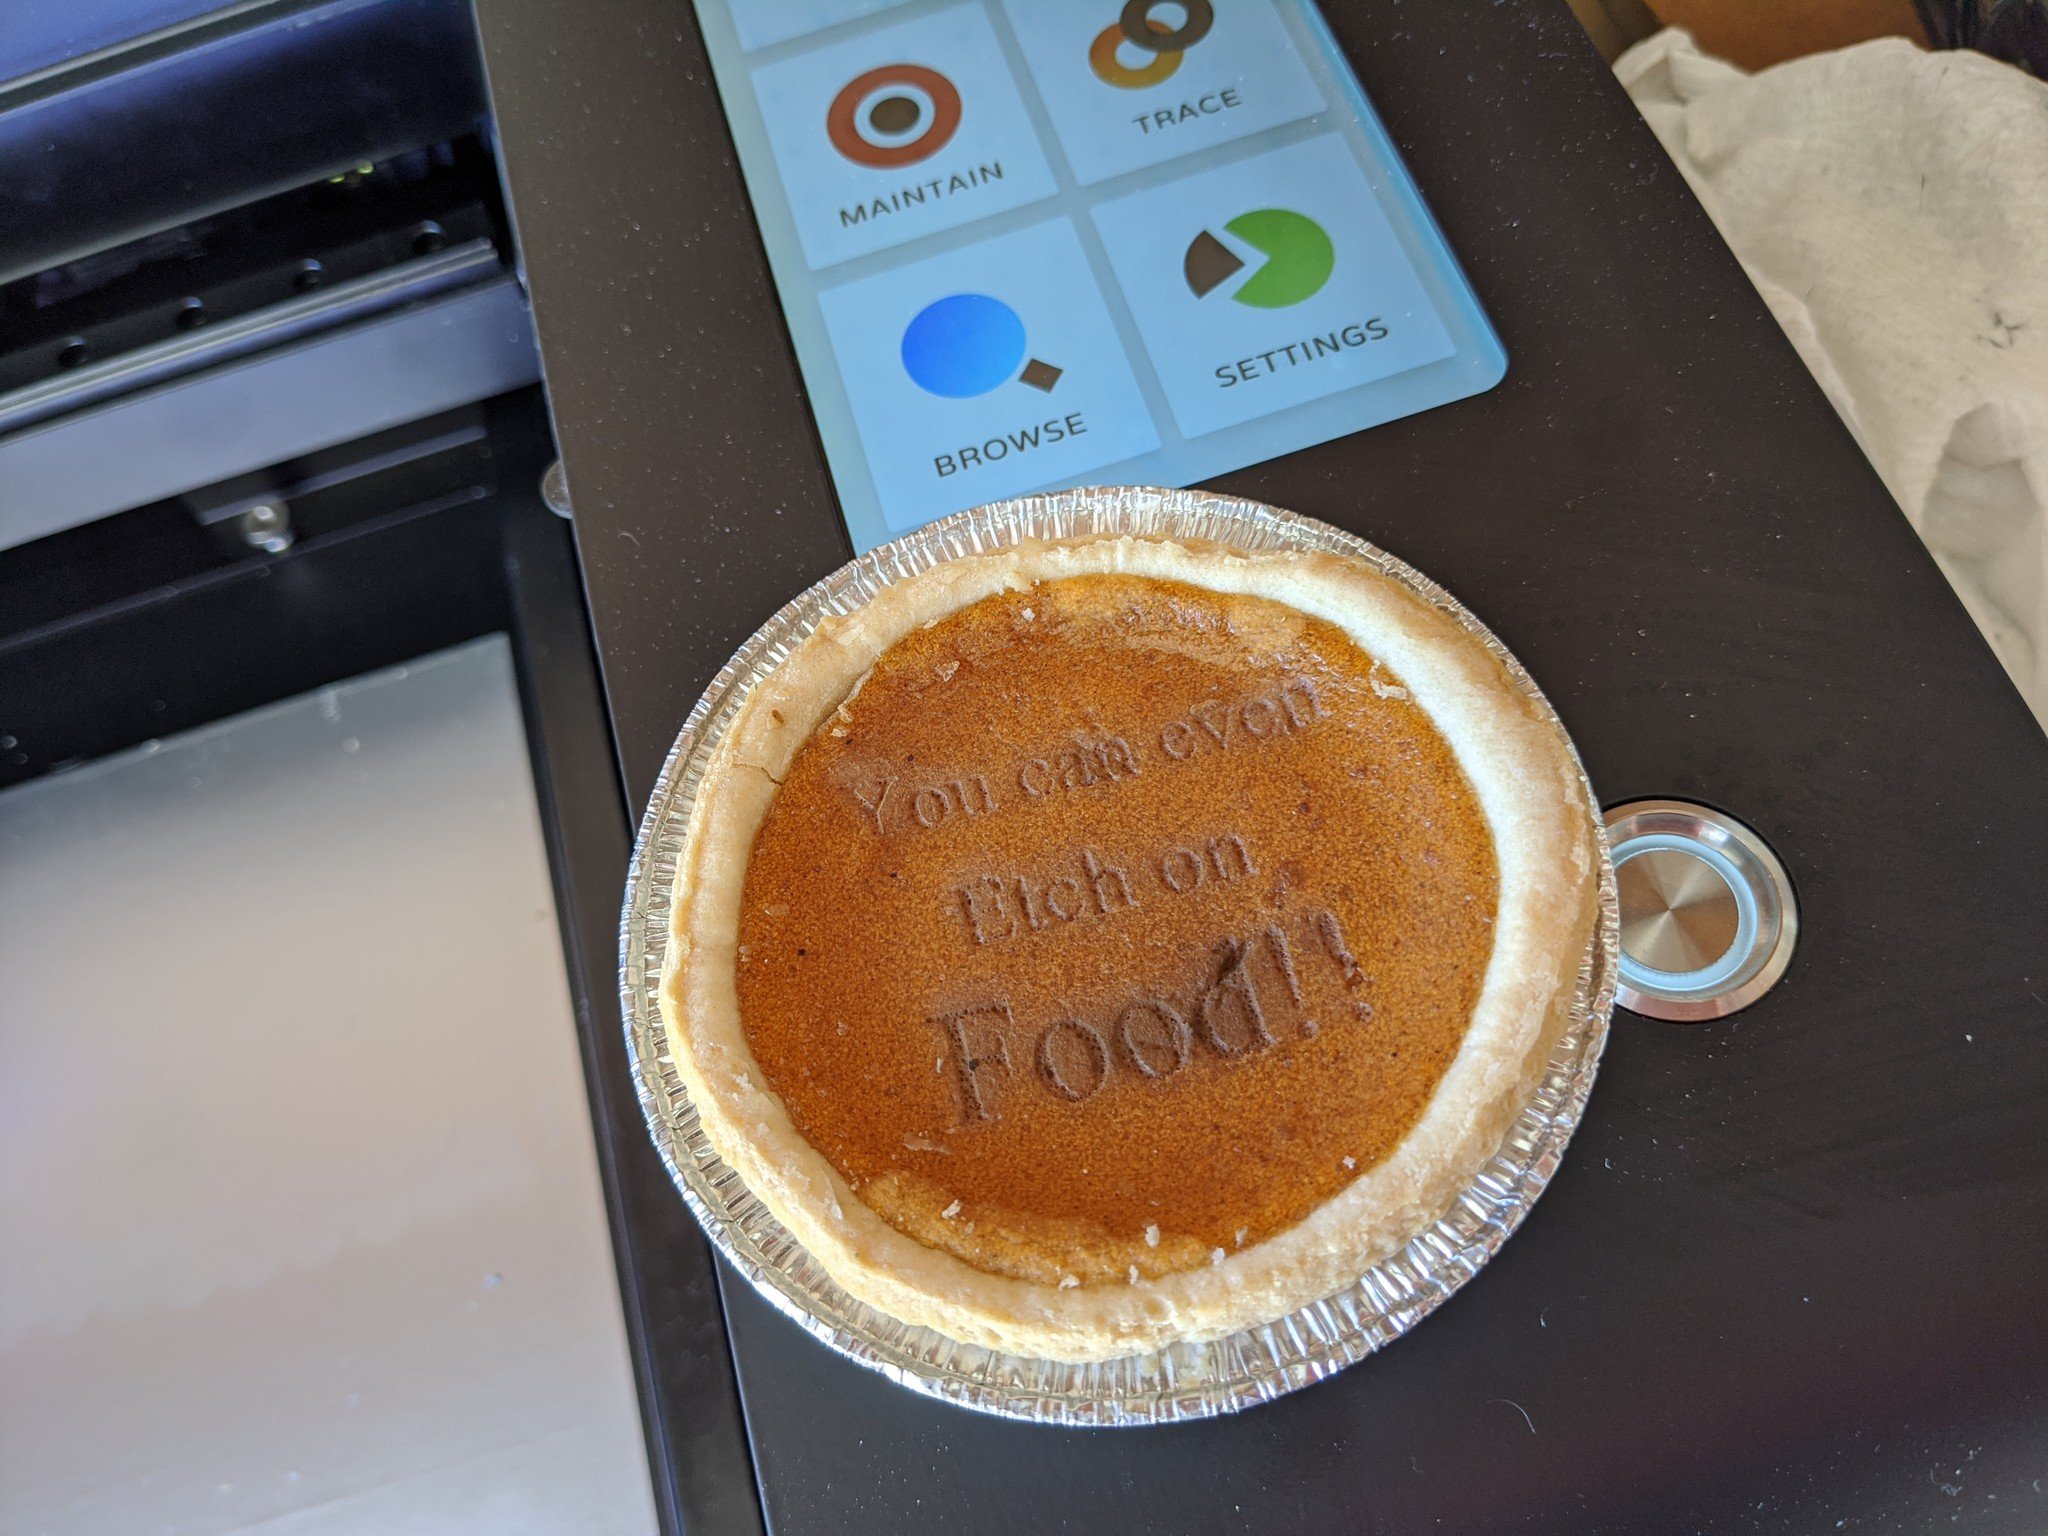 Pumpkin pie with etching on it